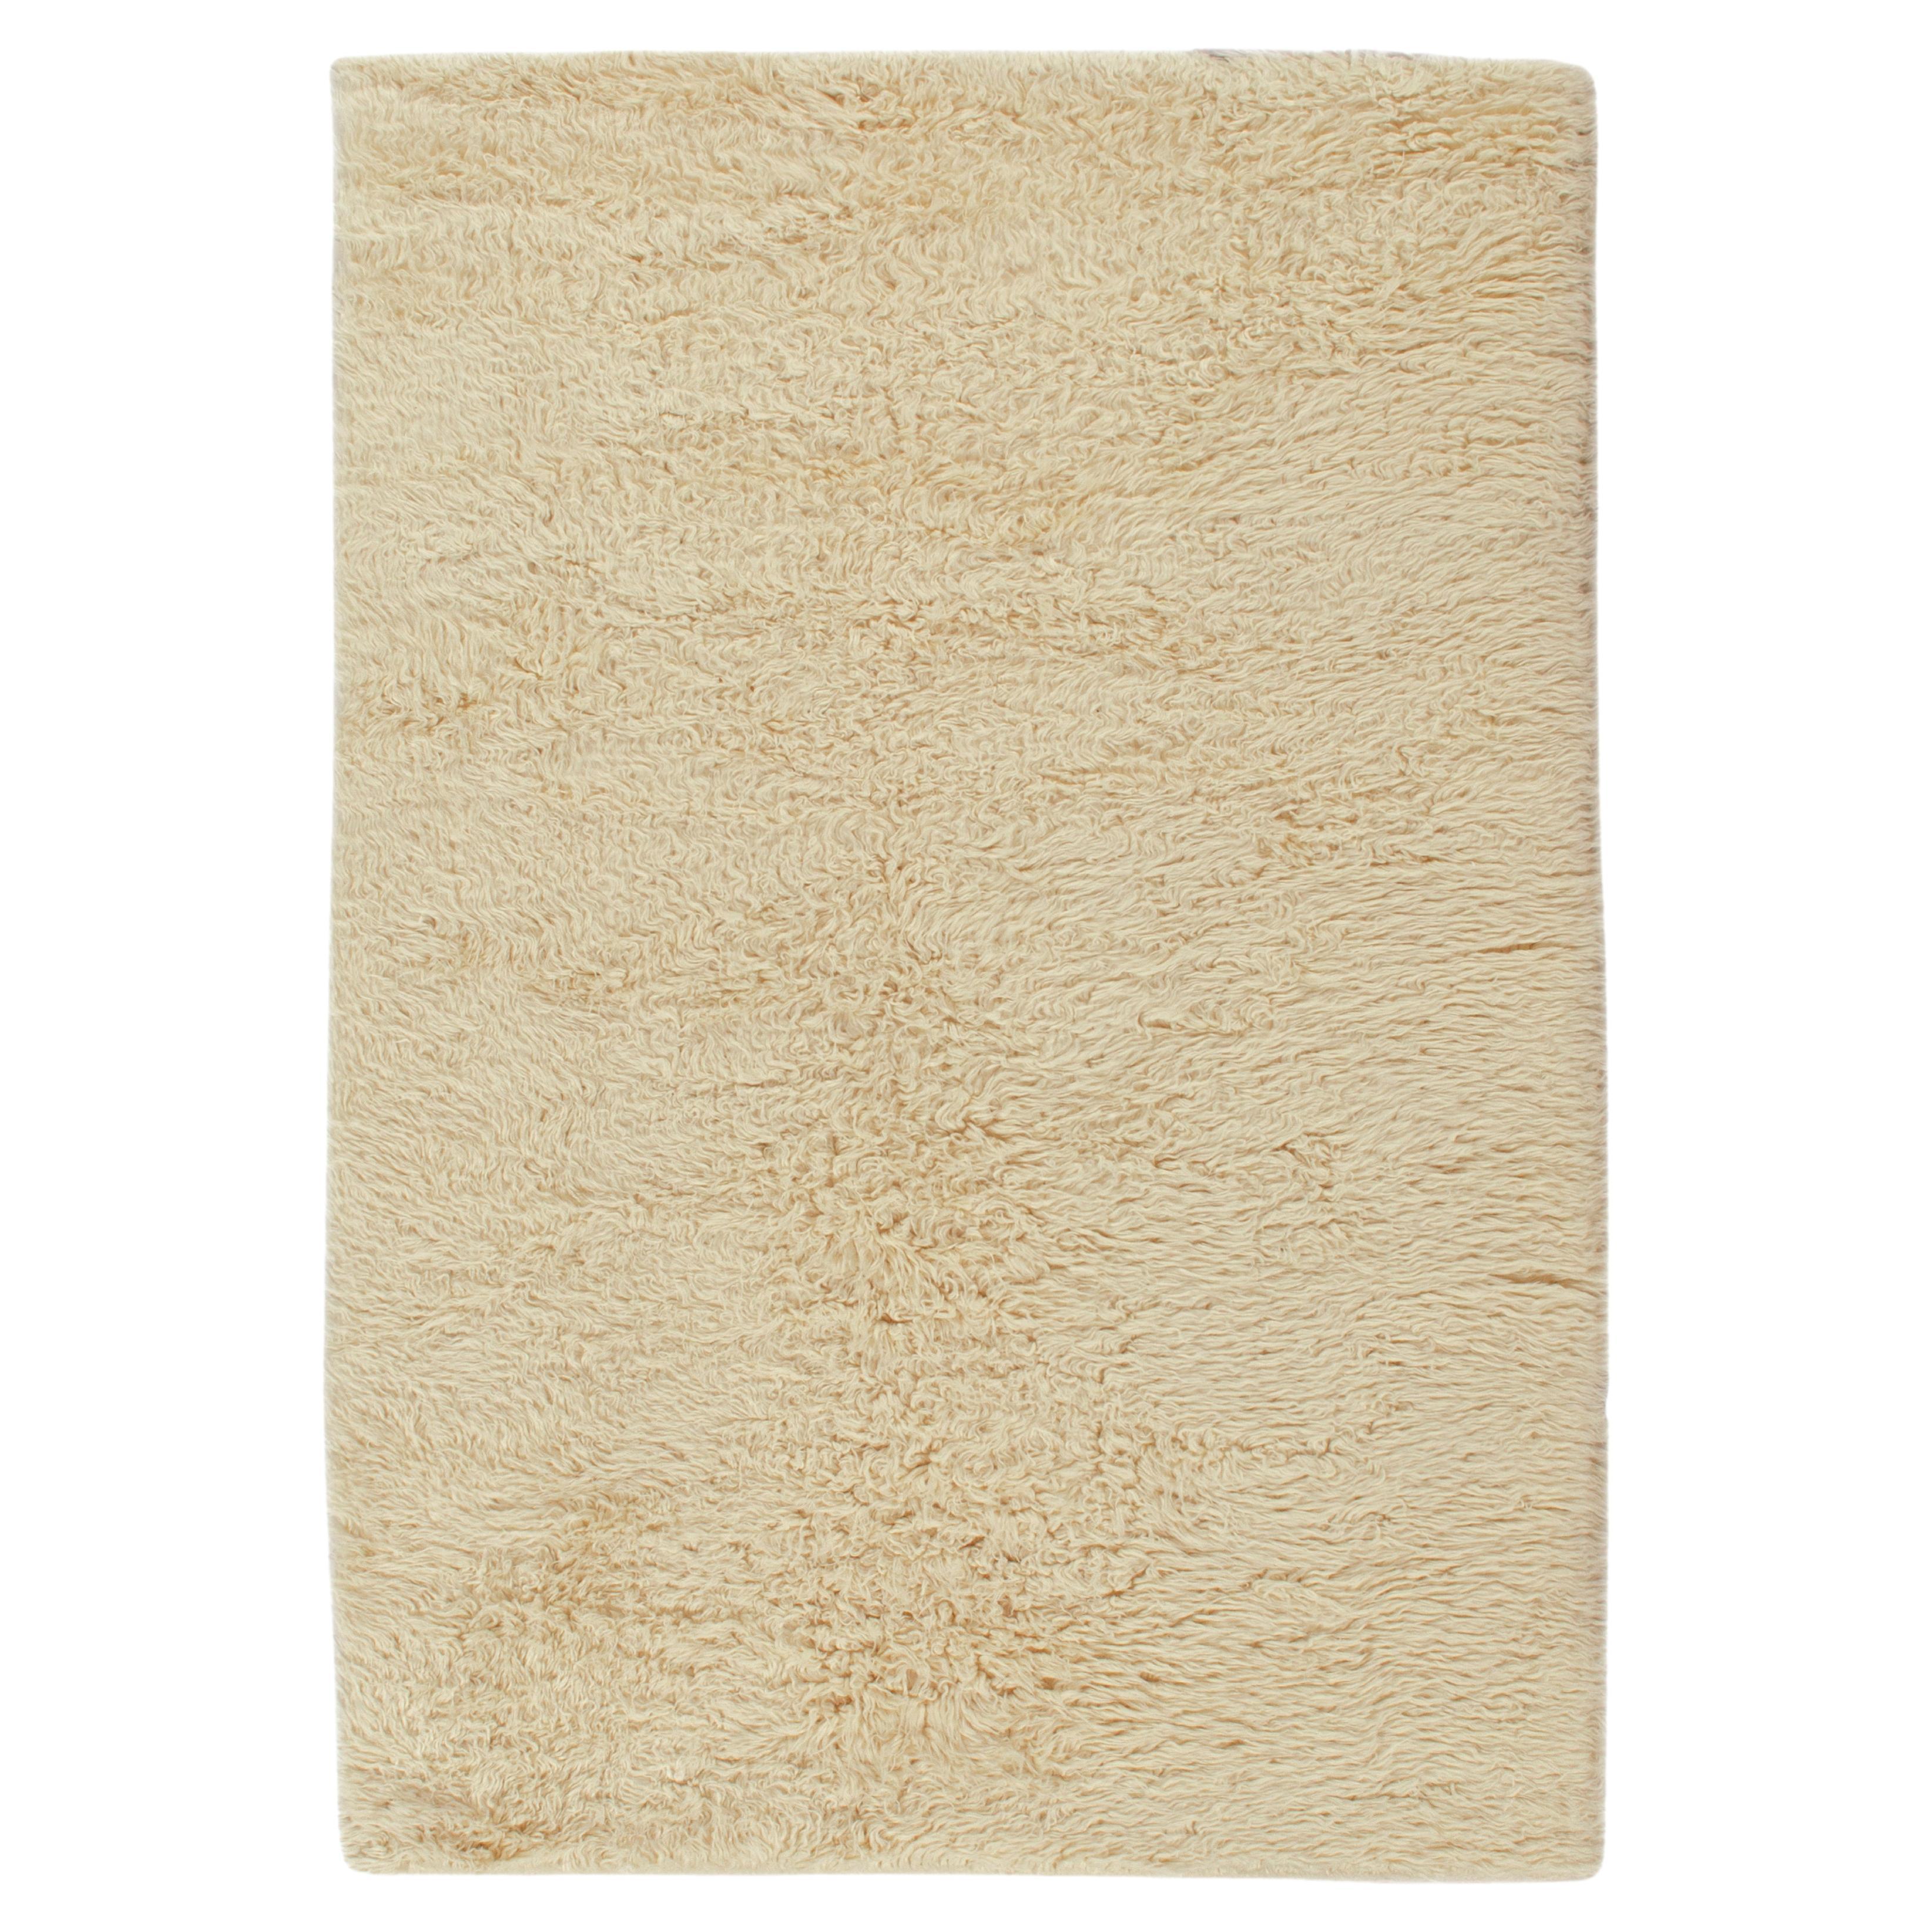 Rug & Kilim’s Moroccan Style Contemporary Rug in Solid Off-White Shag Pile